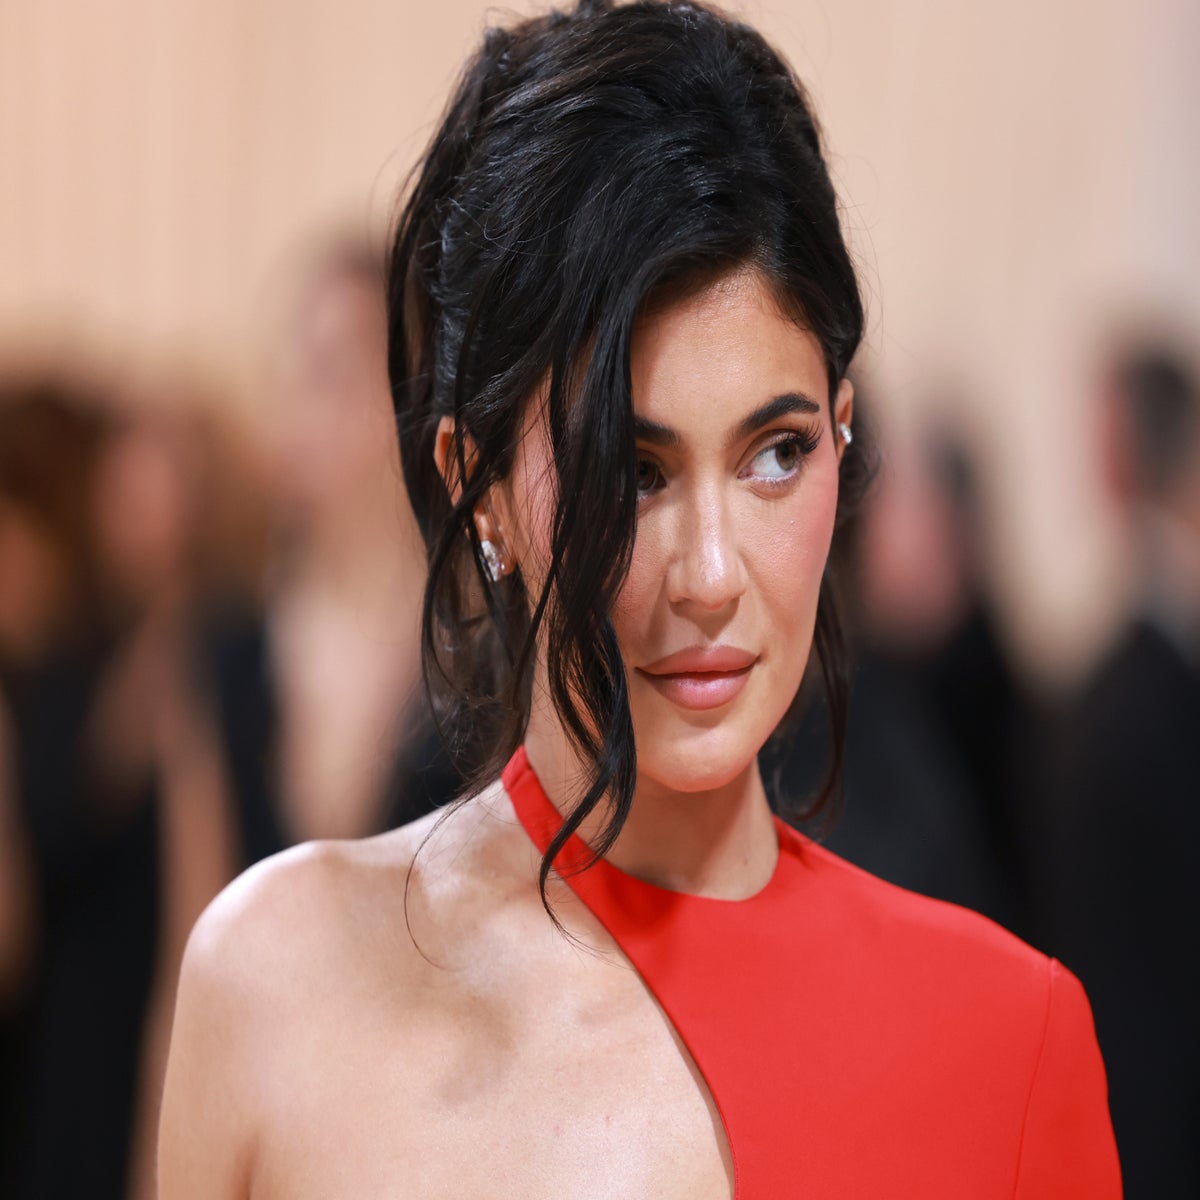 The Kardashians: Kylie Jenner shares regret at having cosmetic surgery on  her breasts aged 19